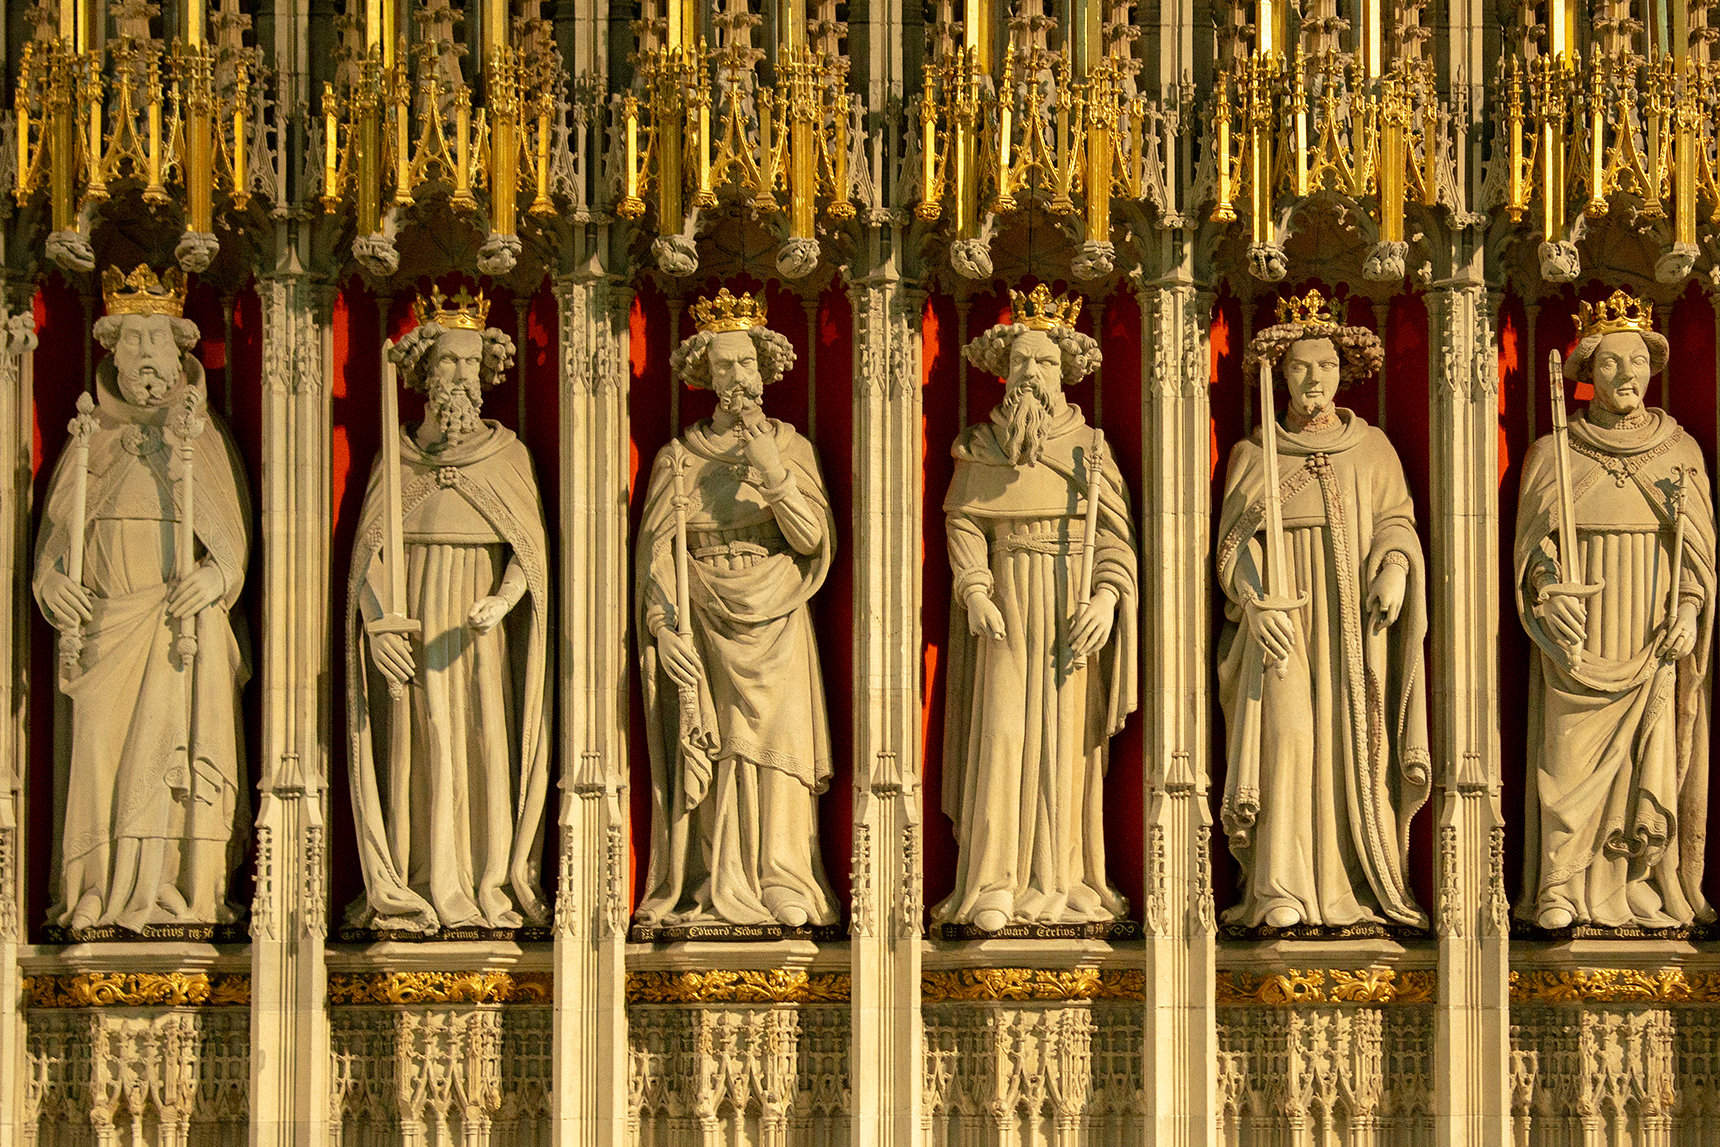 Fifteenth-century Kings‘ Screen in York Minster, made up of numerous statues of English kings, from William the Conqueror to Henry VI. By Peter K. Burian [CC BY-SA 4.0]